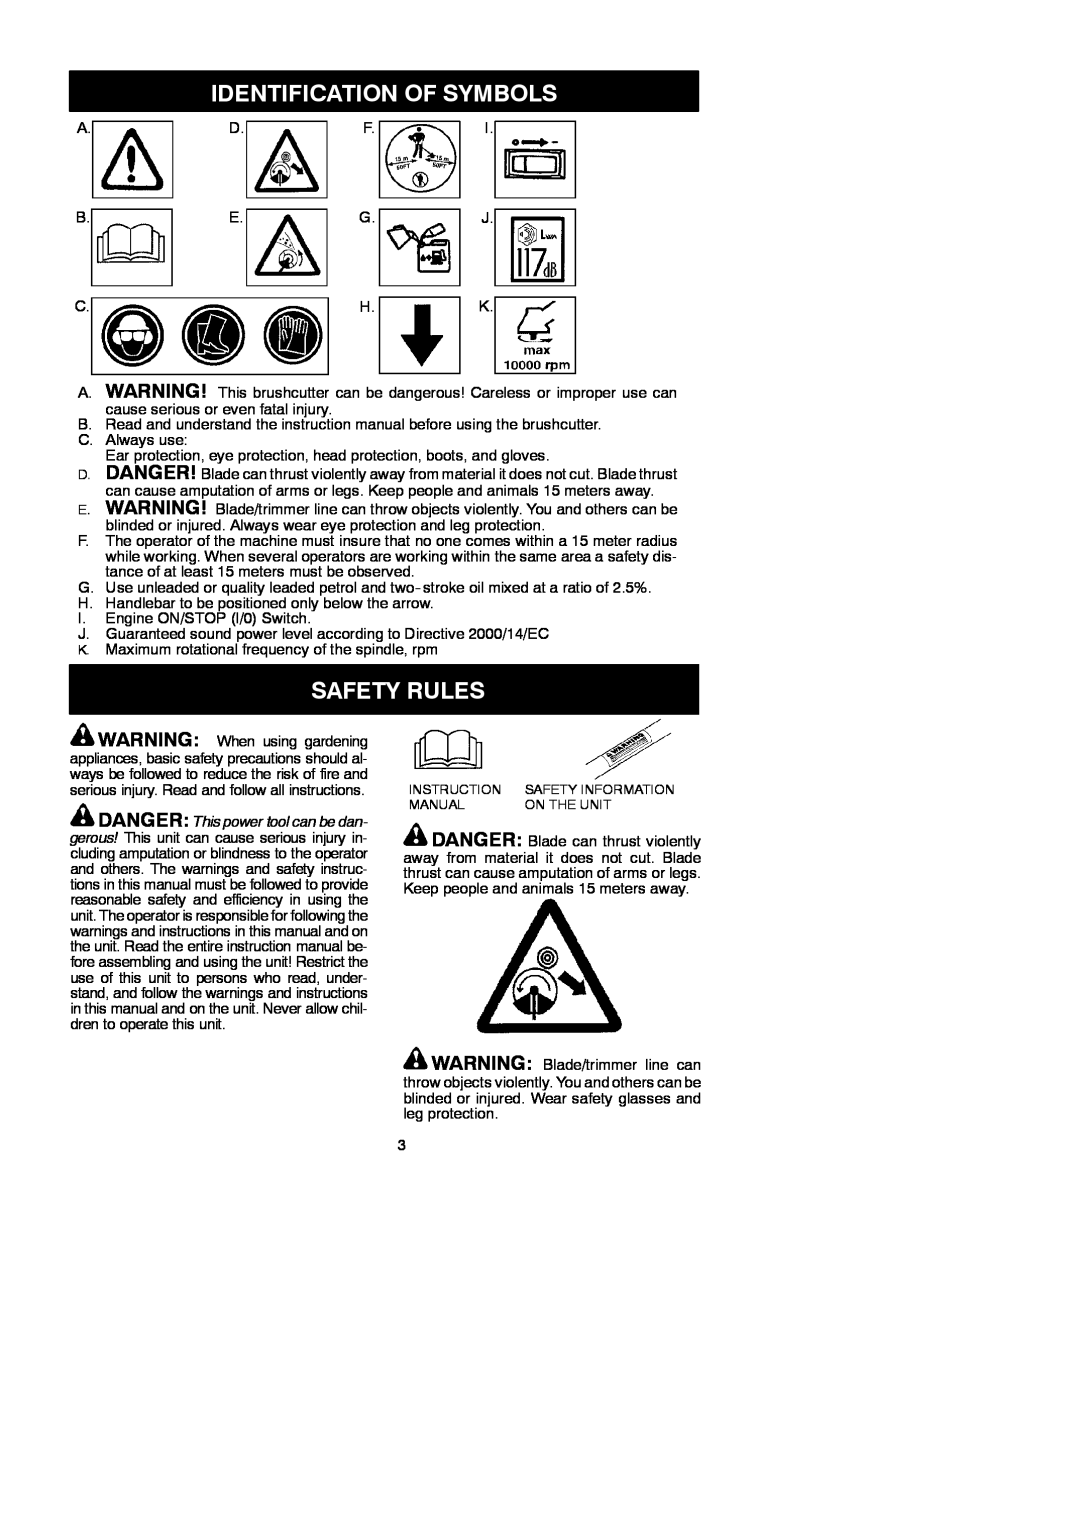 McCulloch 952715746, 433B, 115154526 Identification Of Symbols, Safety Rules, DANGER This power tool can be dan 